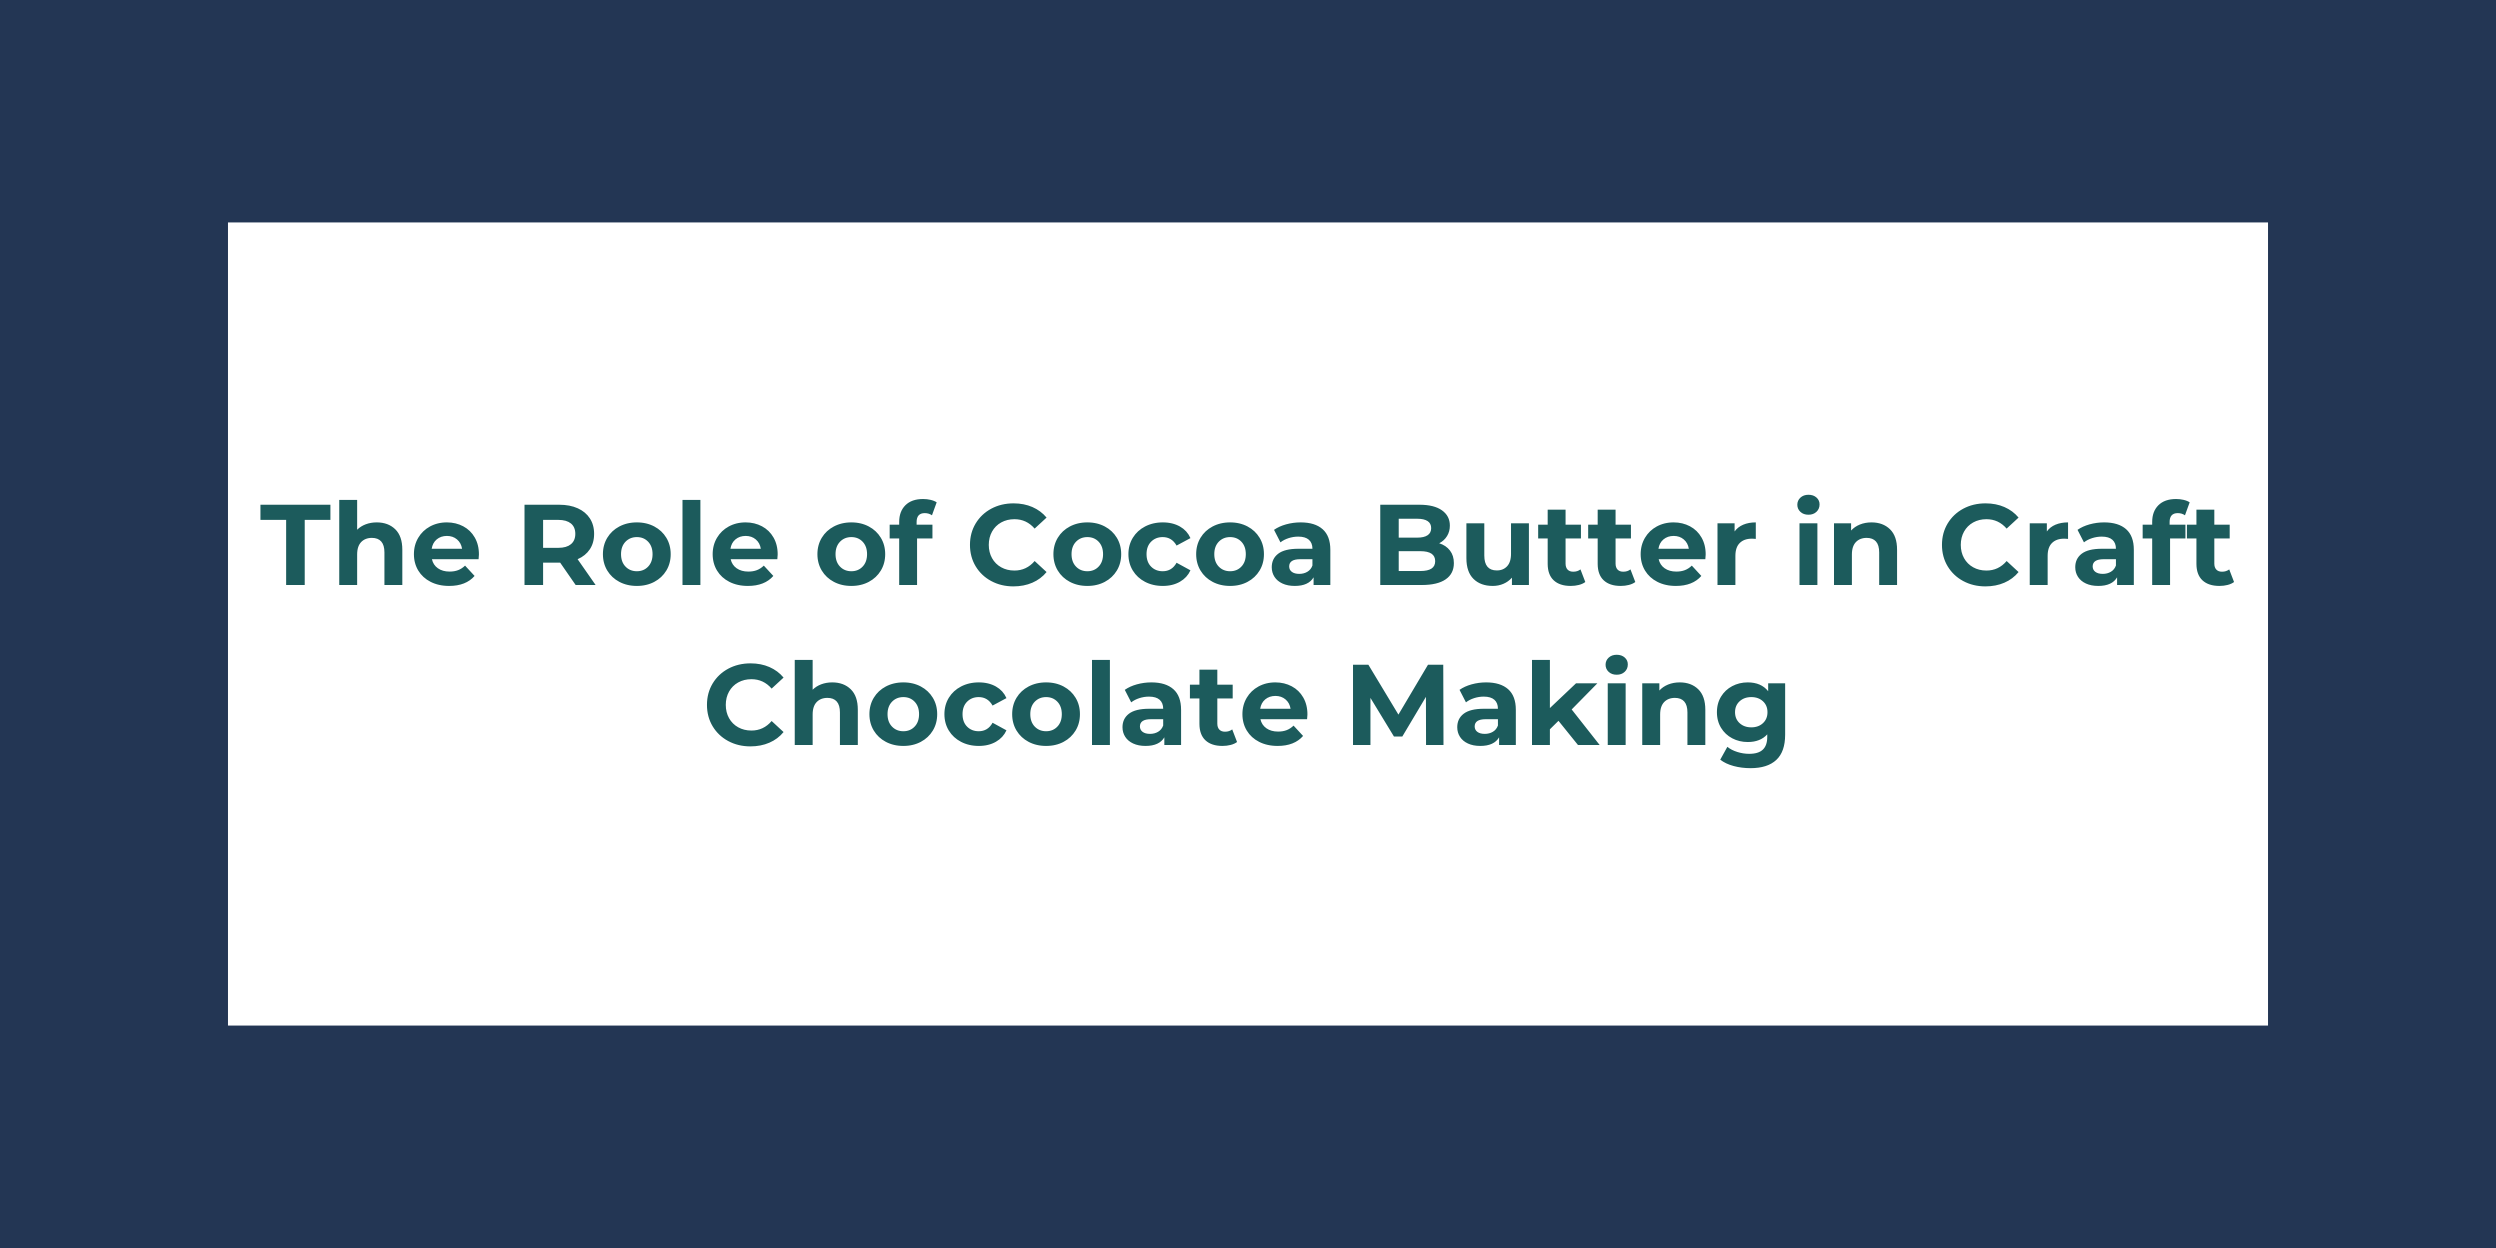 Innovative Applications of Cocoa Butter in Non-Food Industries